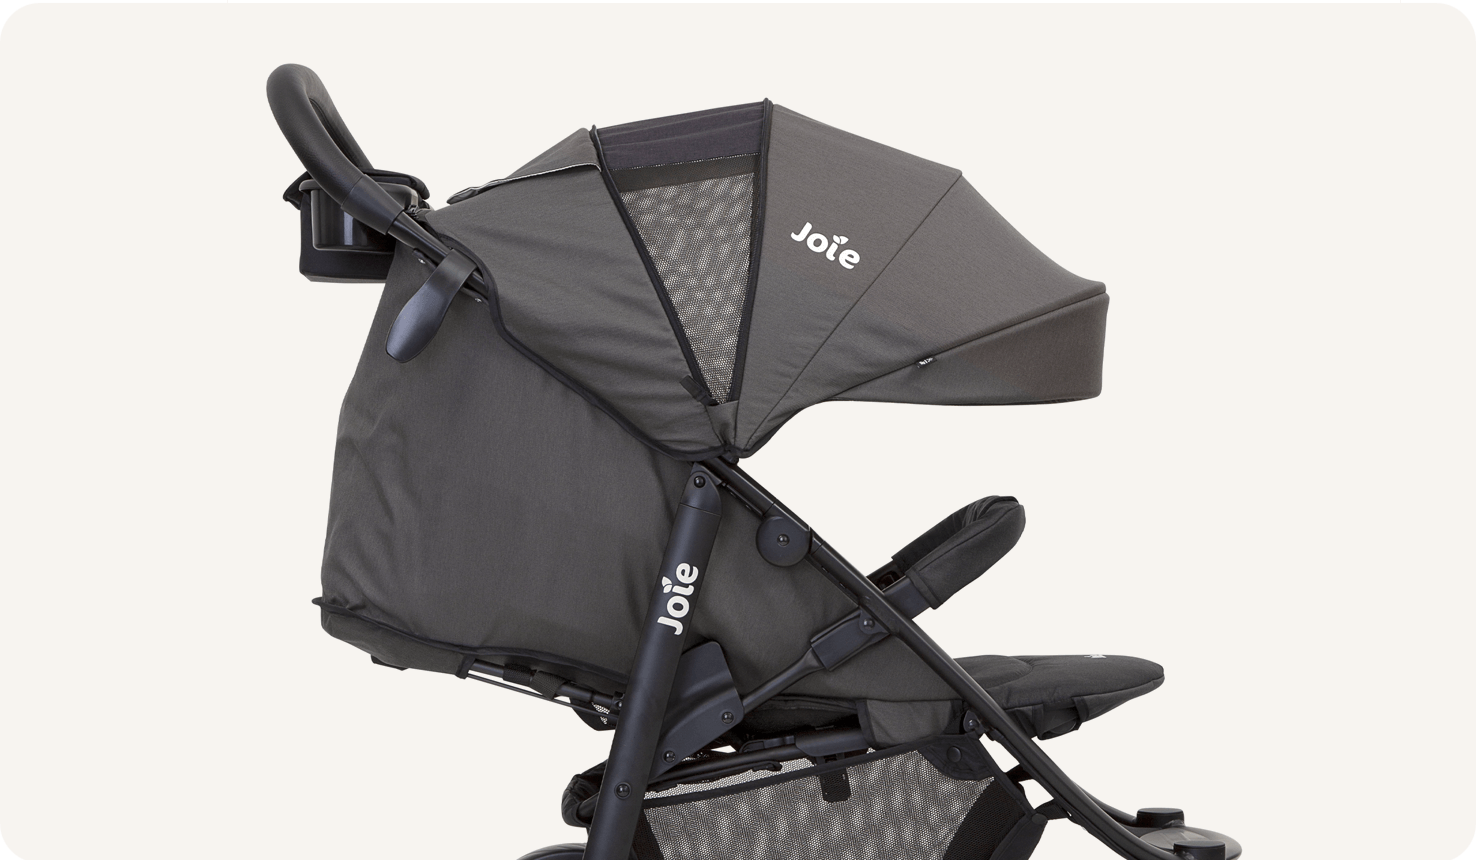 Closeup on a black Joie Litetrax 4 stroller, facing toward the right in profile, fully reclined and with the canopy extended.